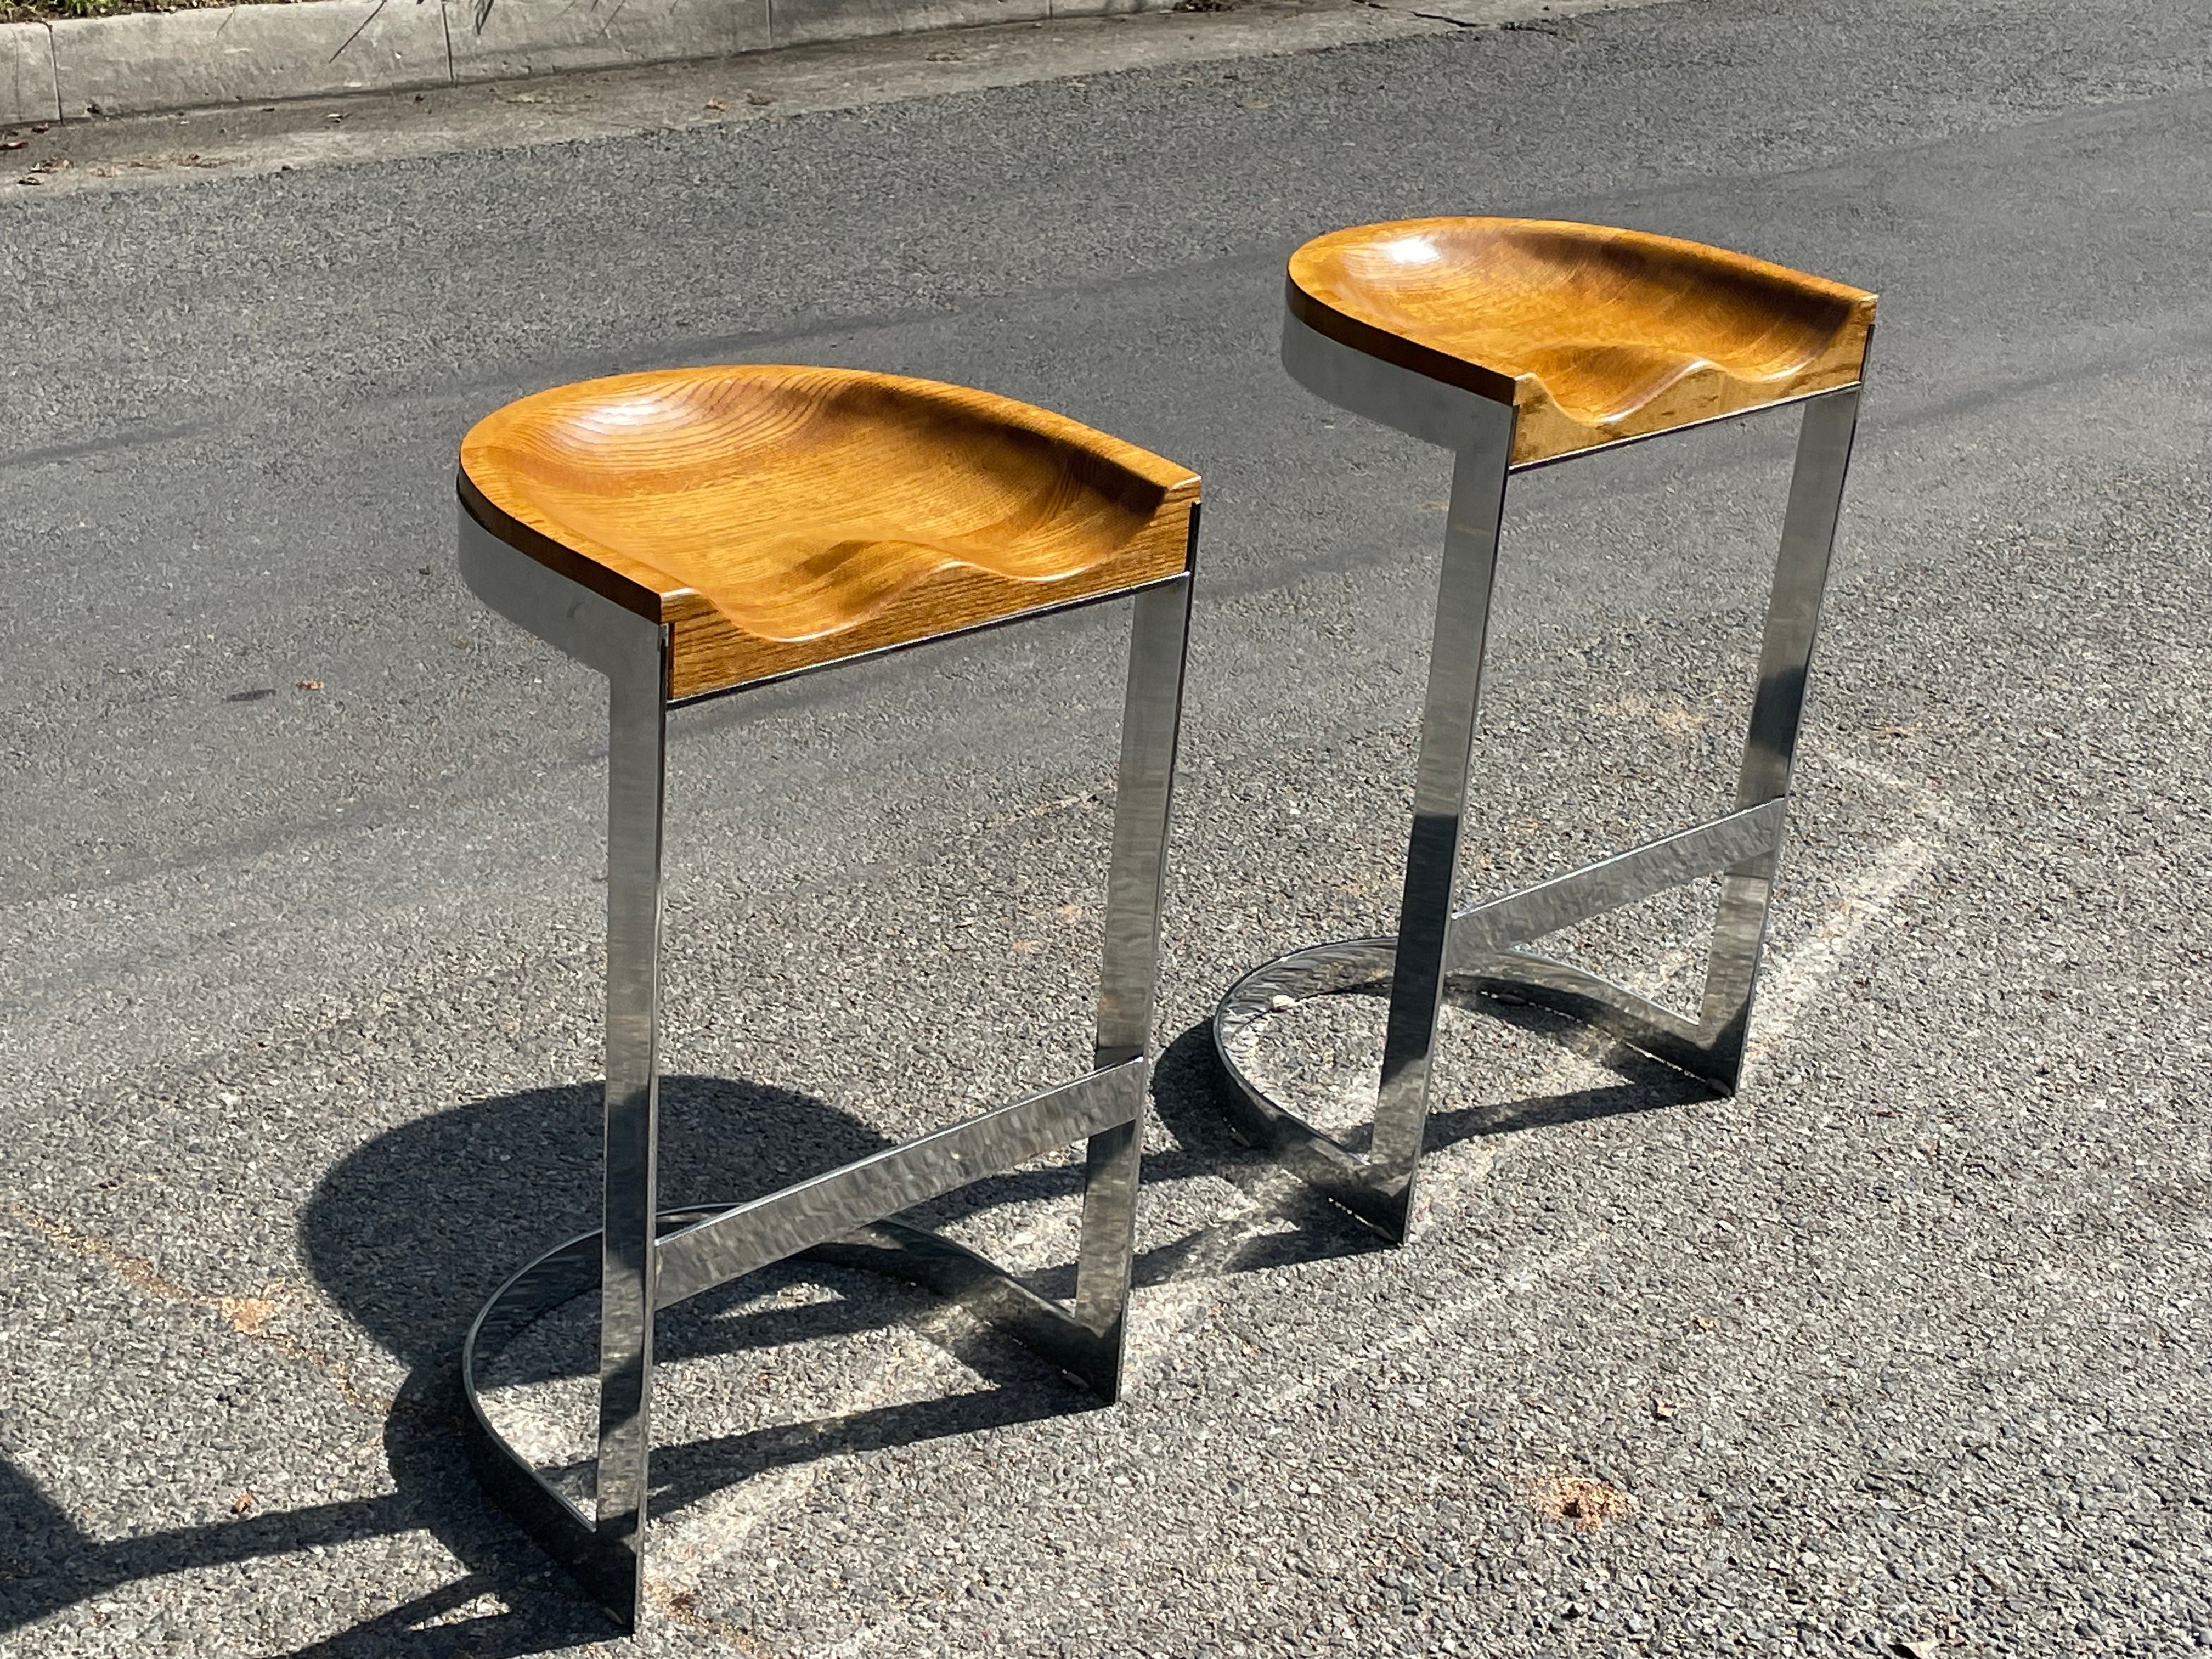 Pair of vintage Warren Bacon bar stools in solid chromed steel with carved wood saddle solid oak formed seat top. Circa 1970s.

Each bar stool measures 28